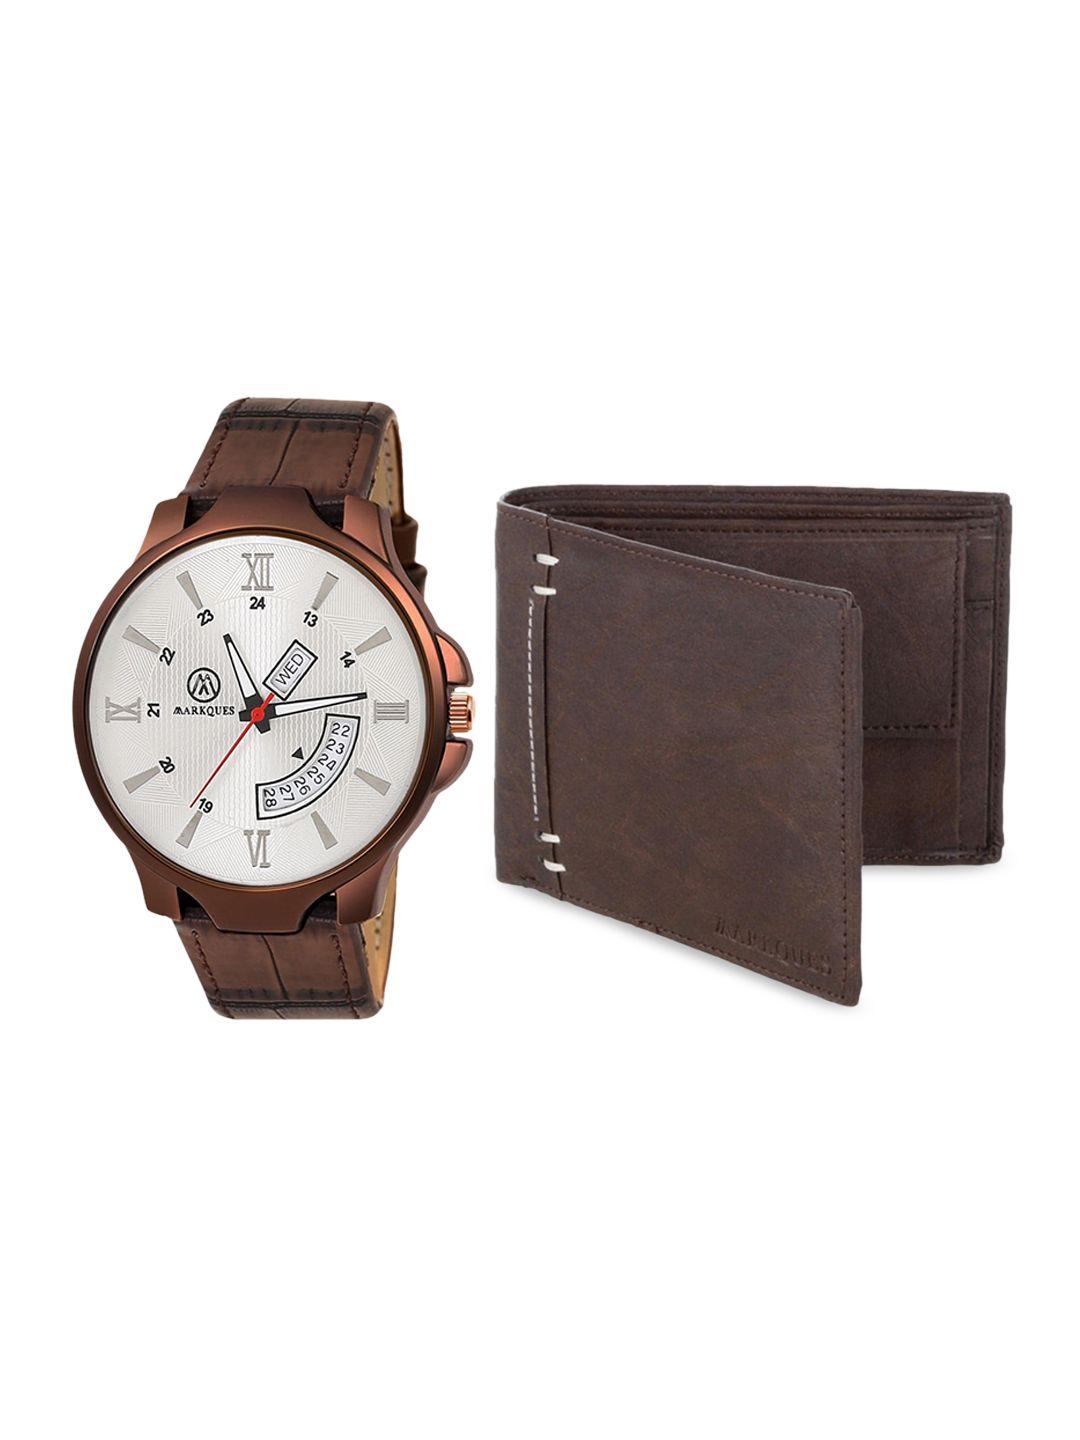 markques-men-brown-watch-and-wallet-combo-accessory-gift-set